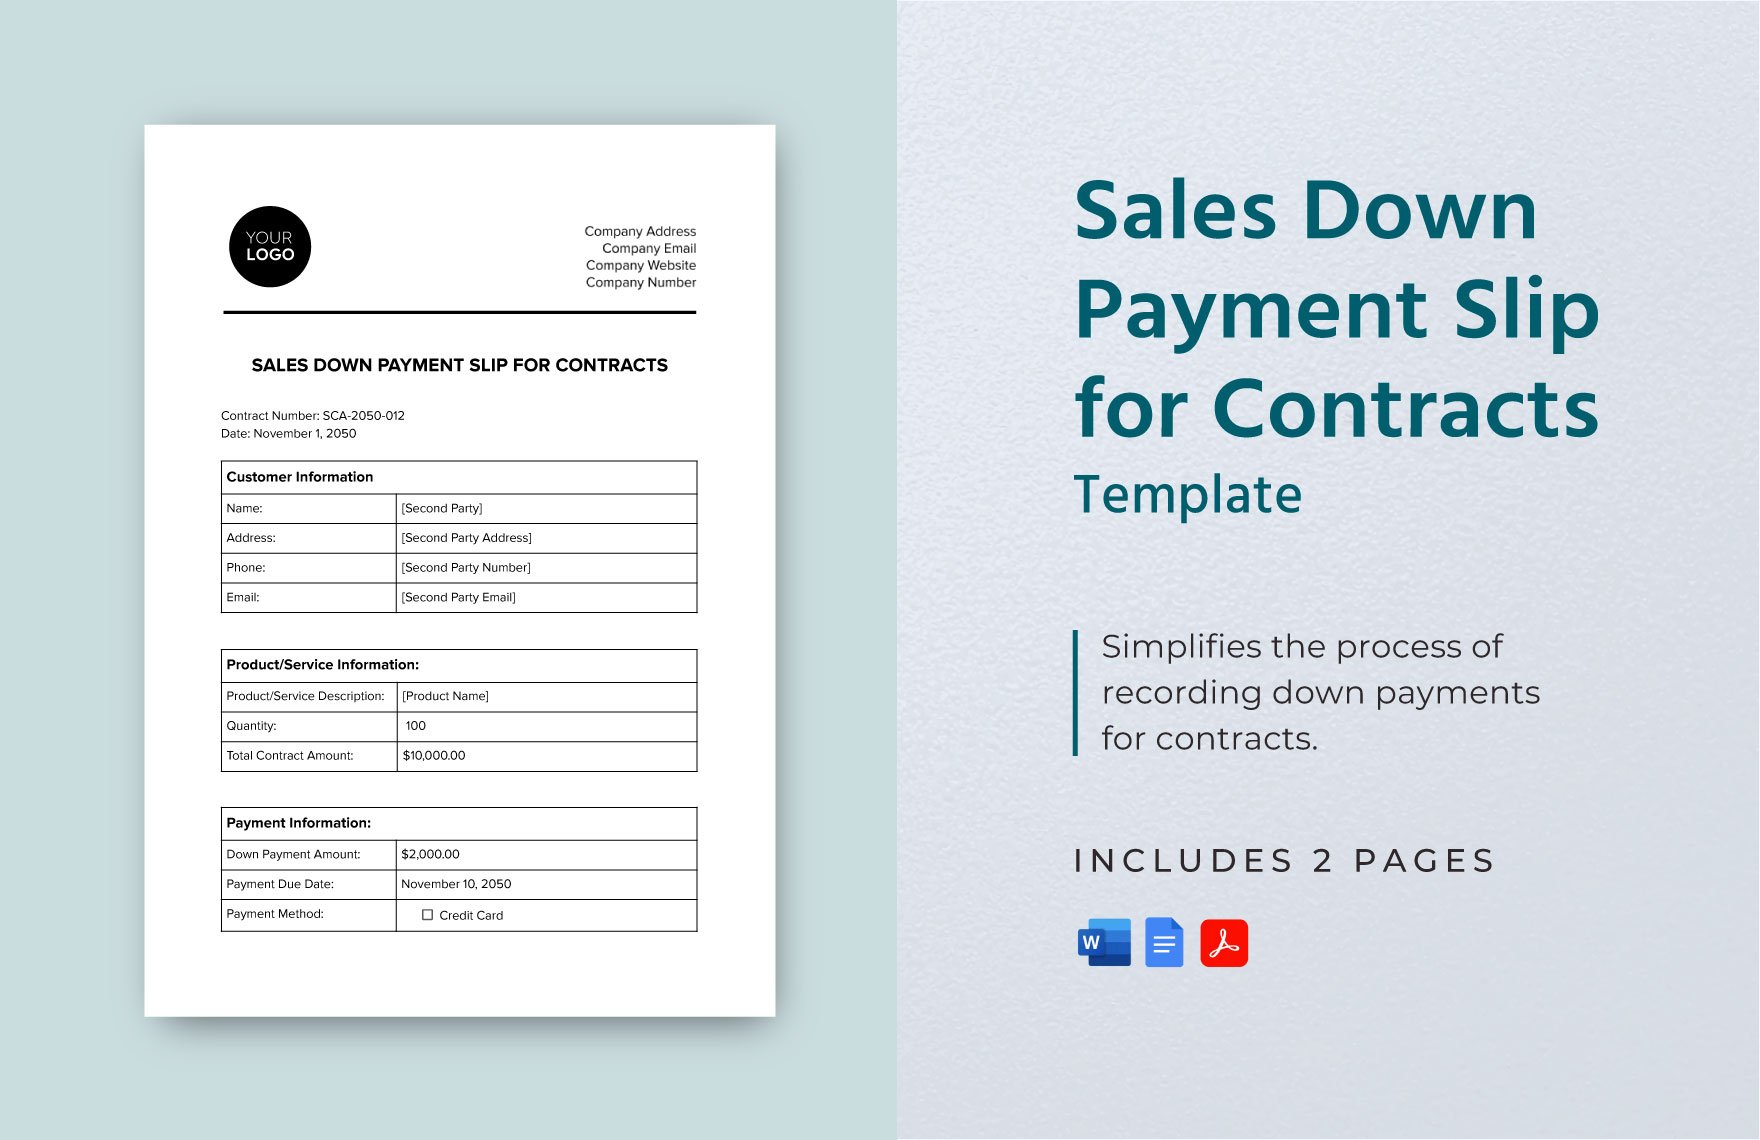 Sales Down Payment Slip for Contracts Template in Word, Google Docs, PDF